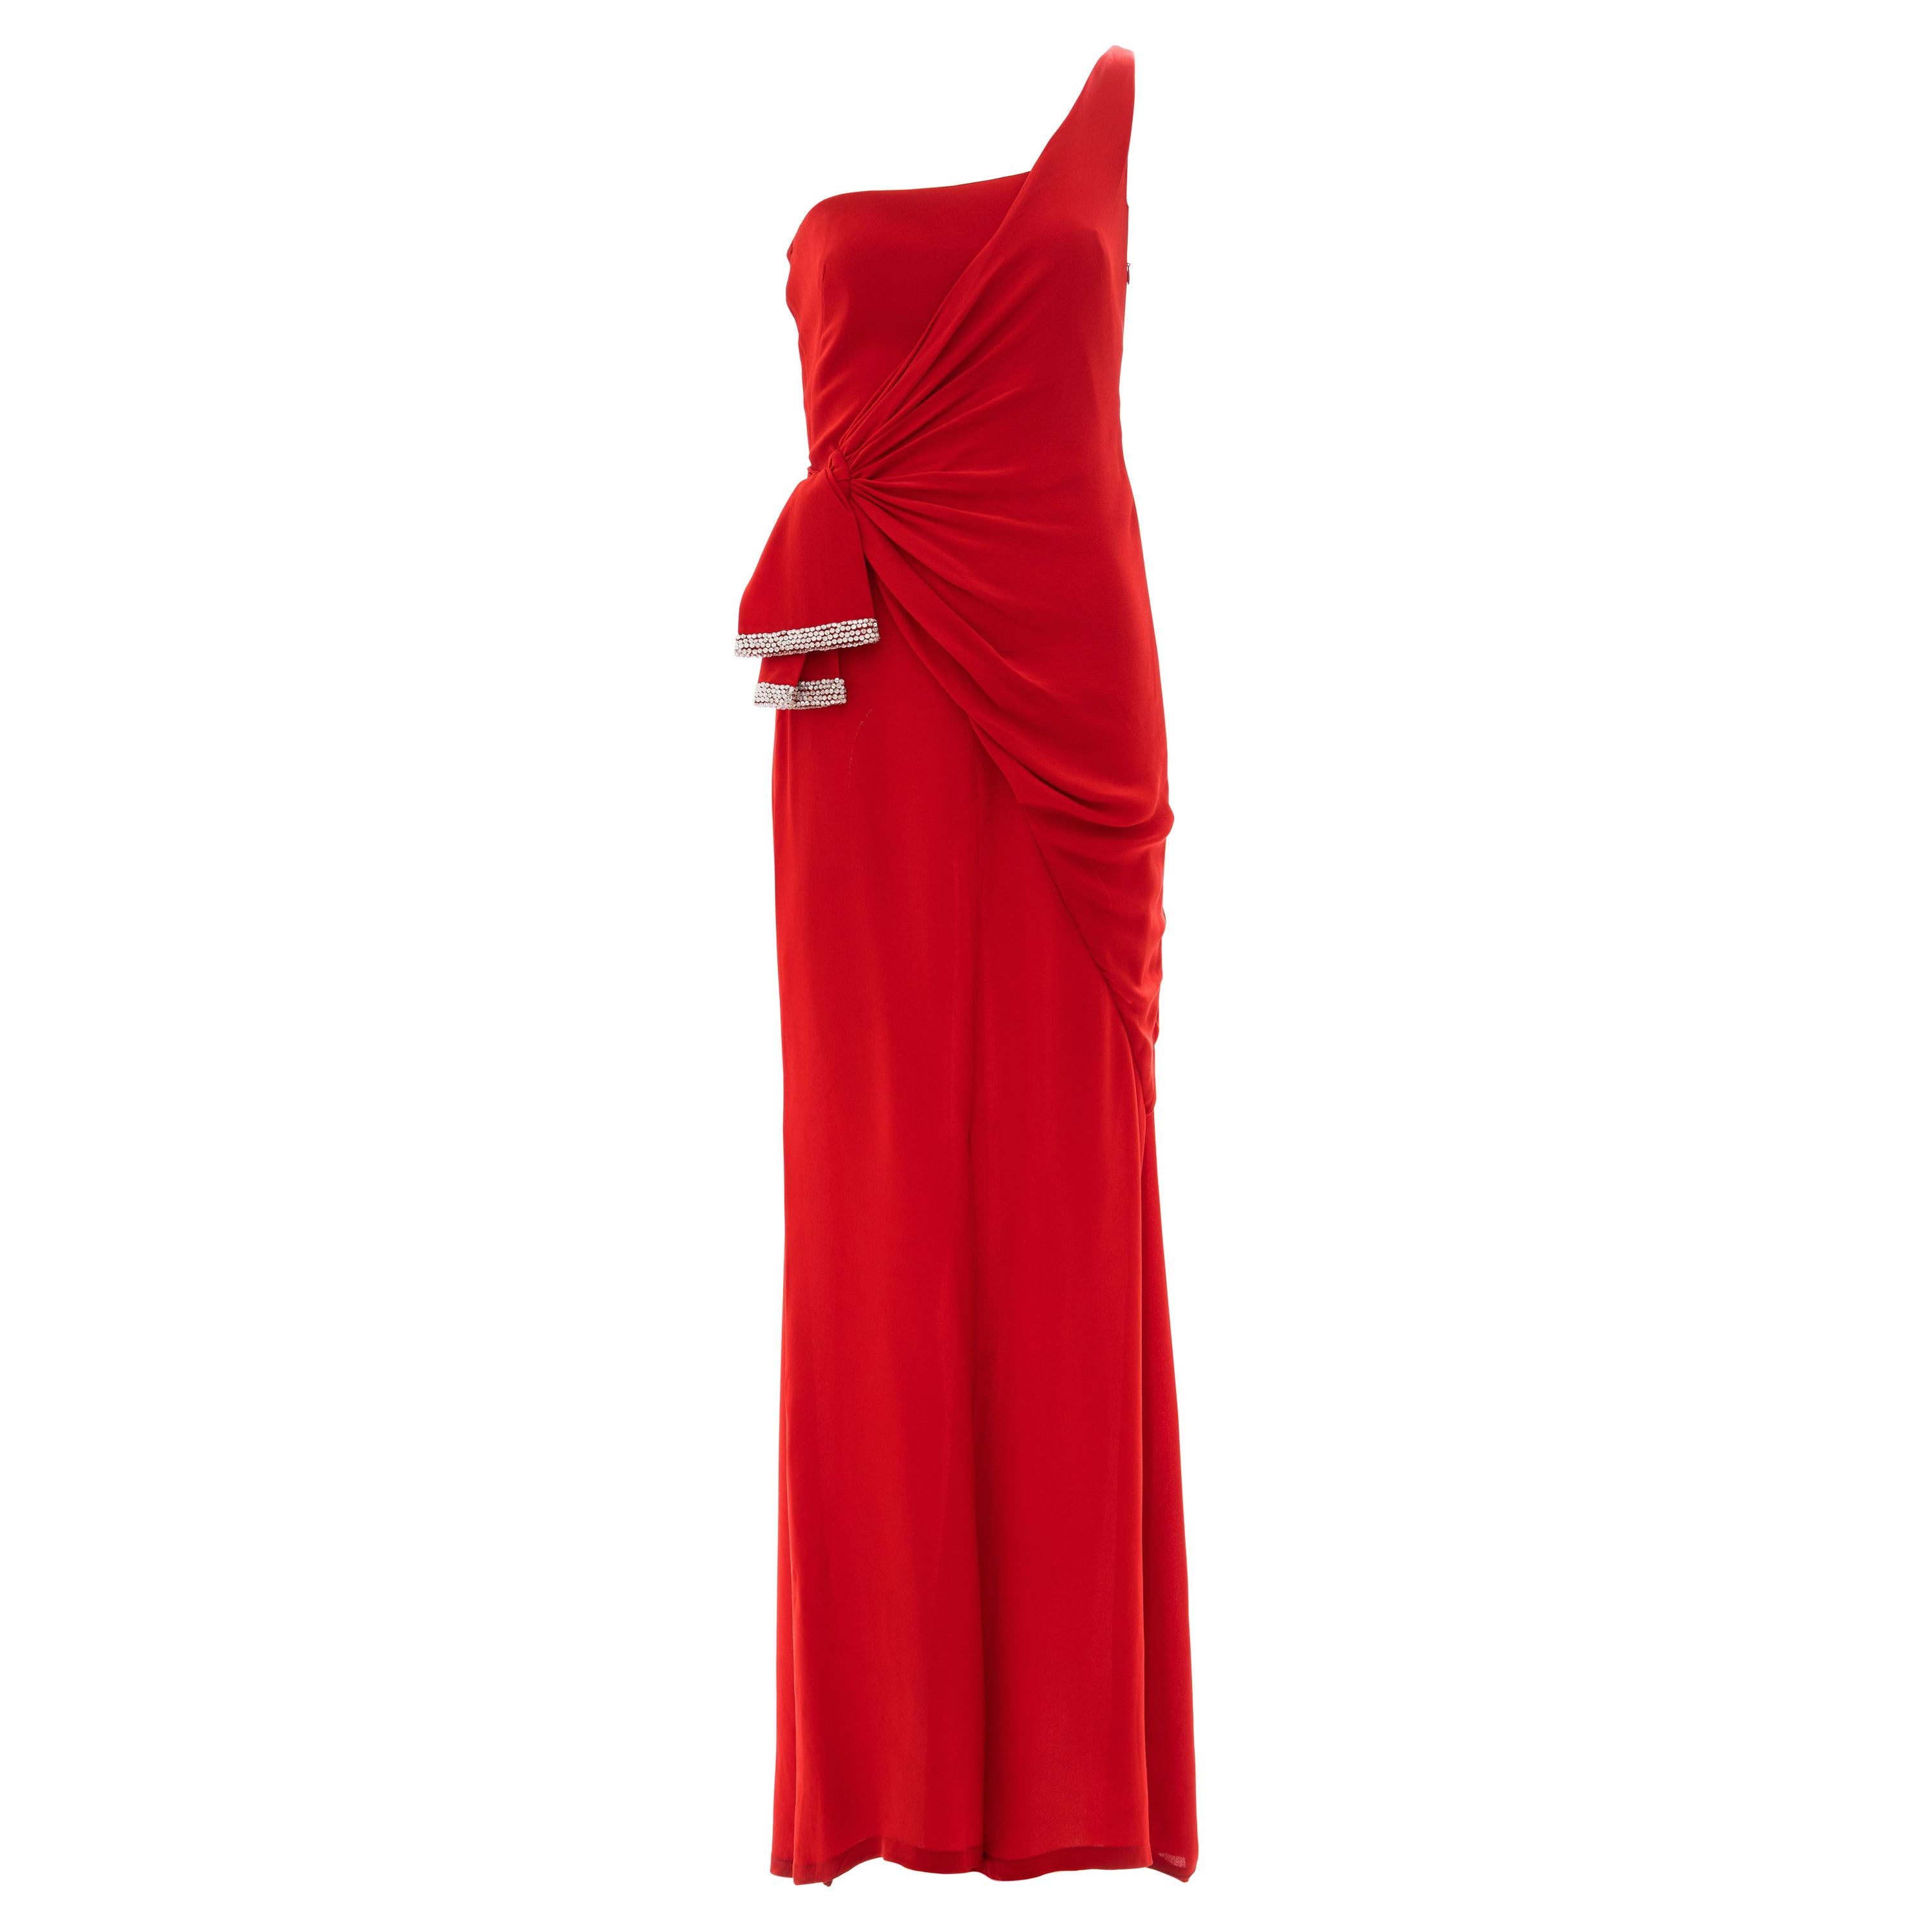 Valentino Runway Red Silk Crepe Evening Dress (Final Collection), Spring 2008 For Sale